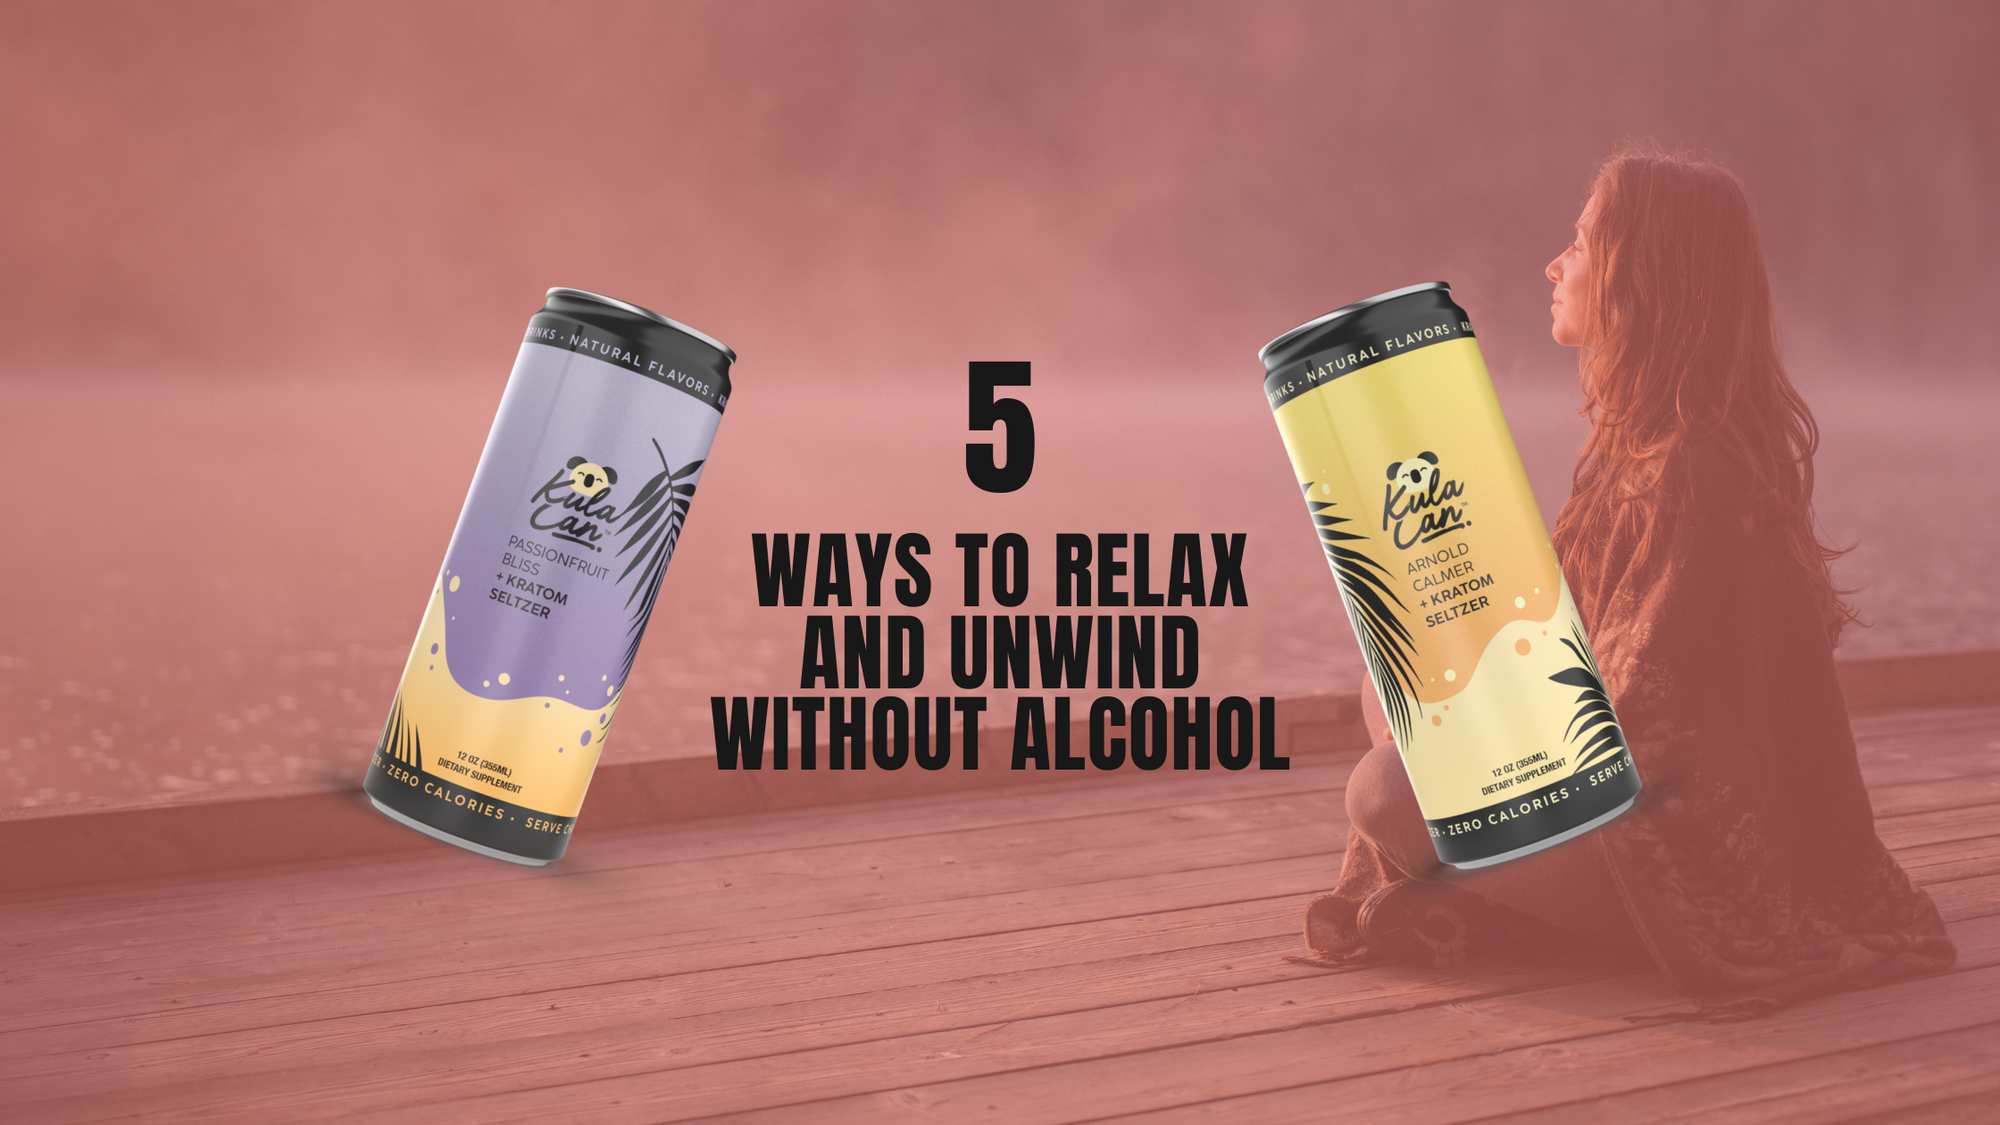 5 Ways to Relax and Unwind Without Alcohol